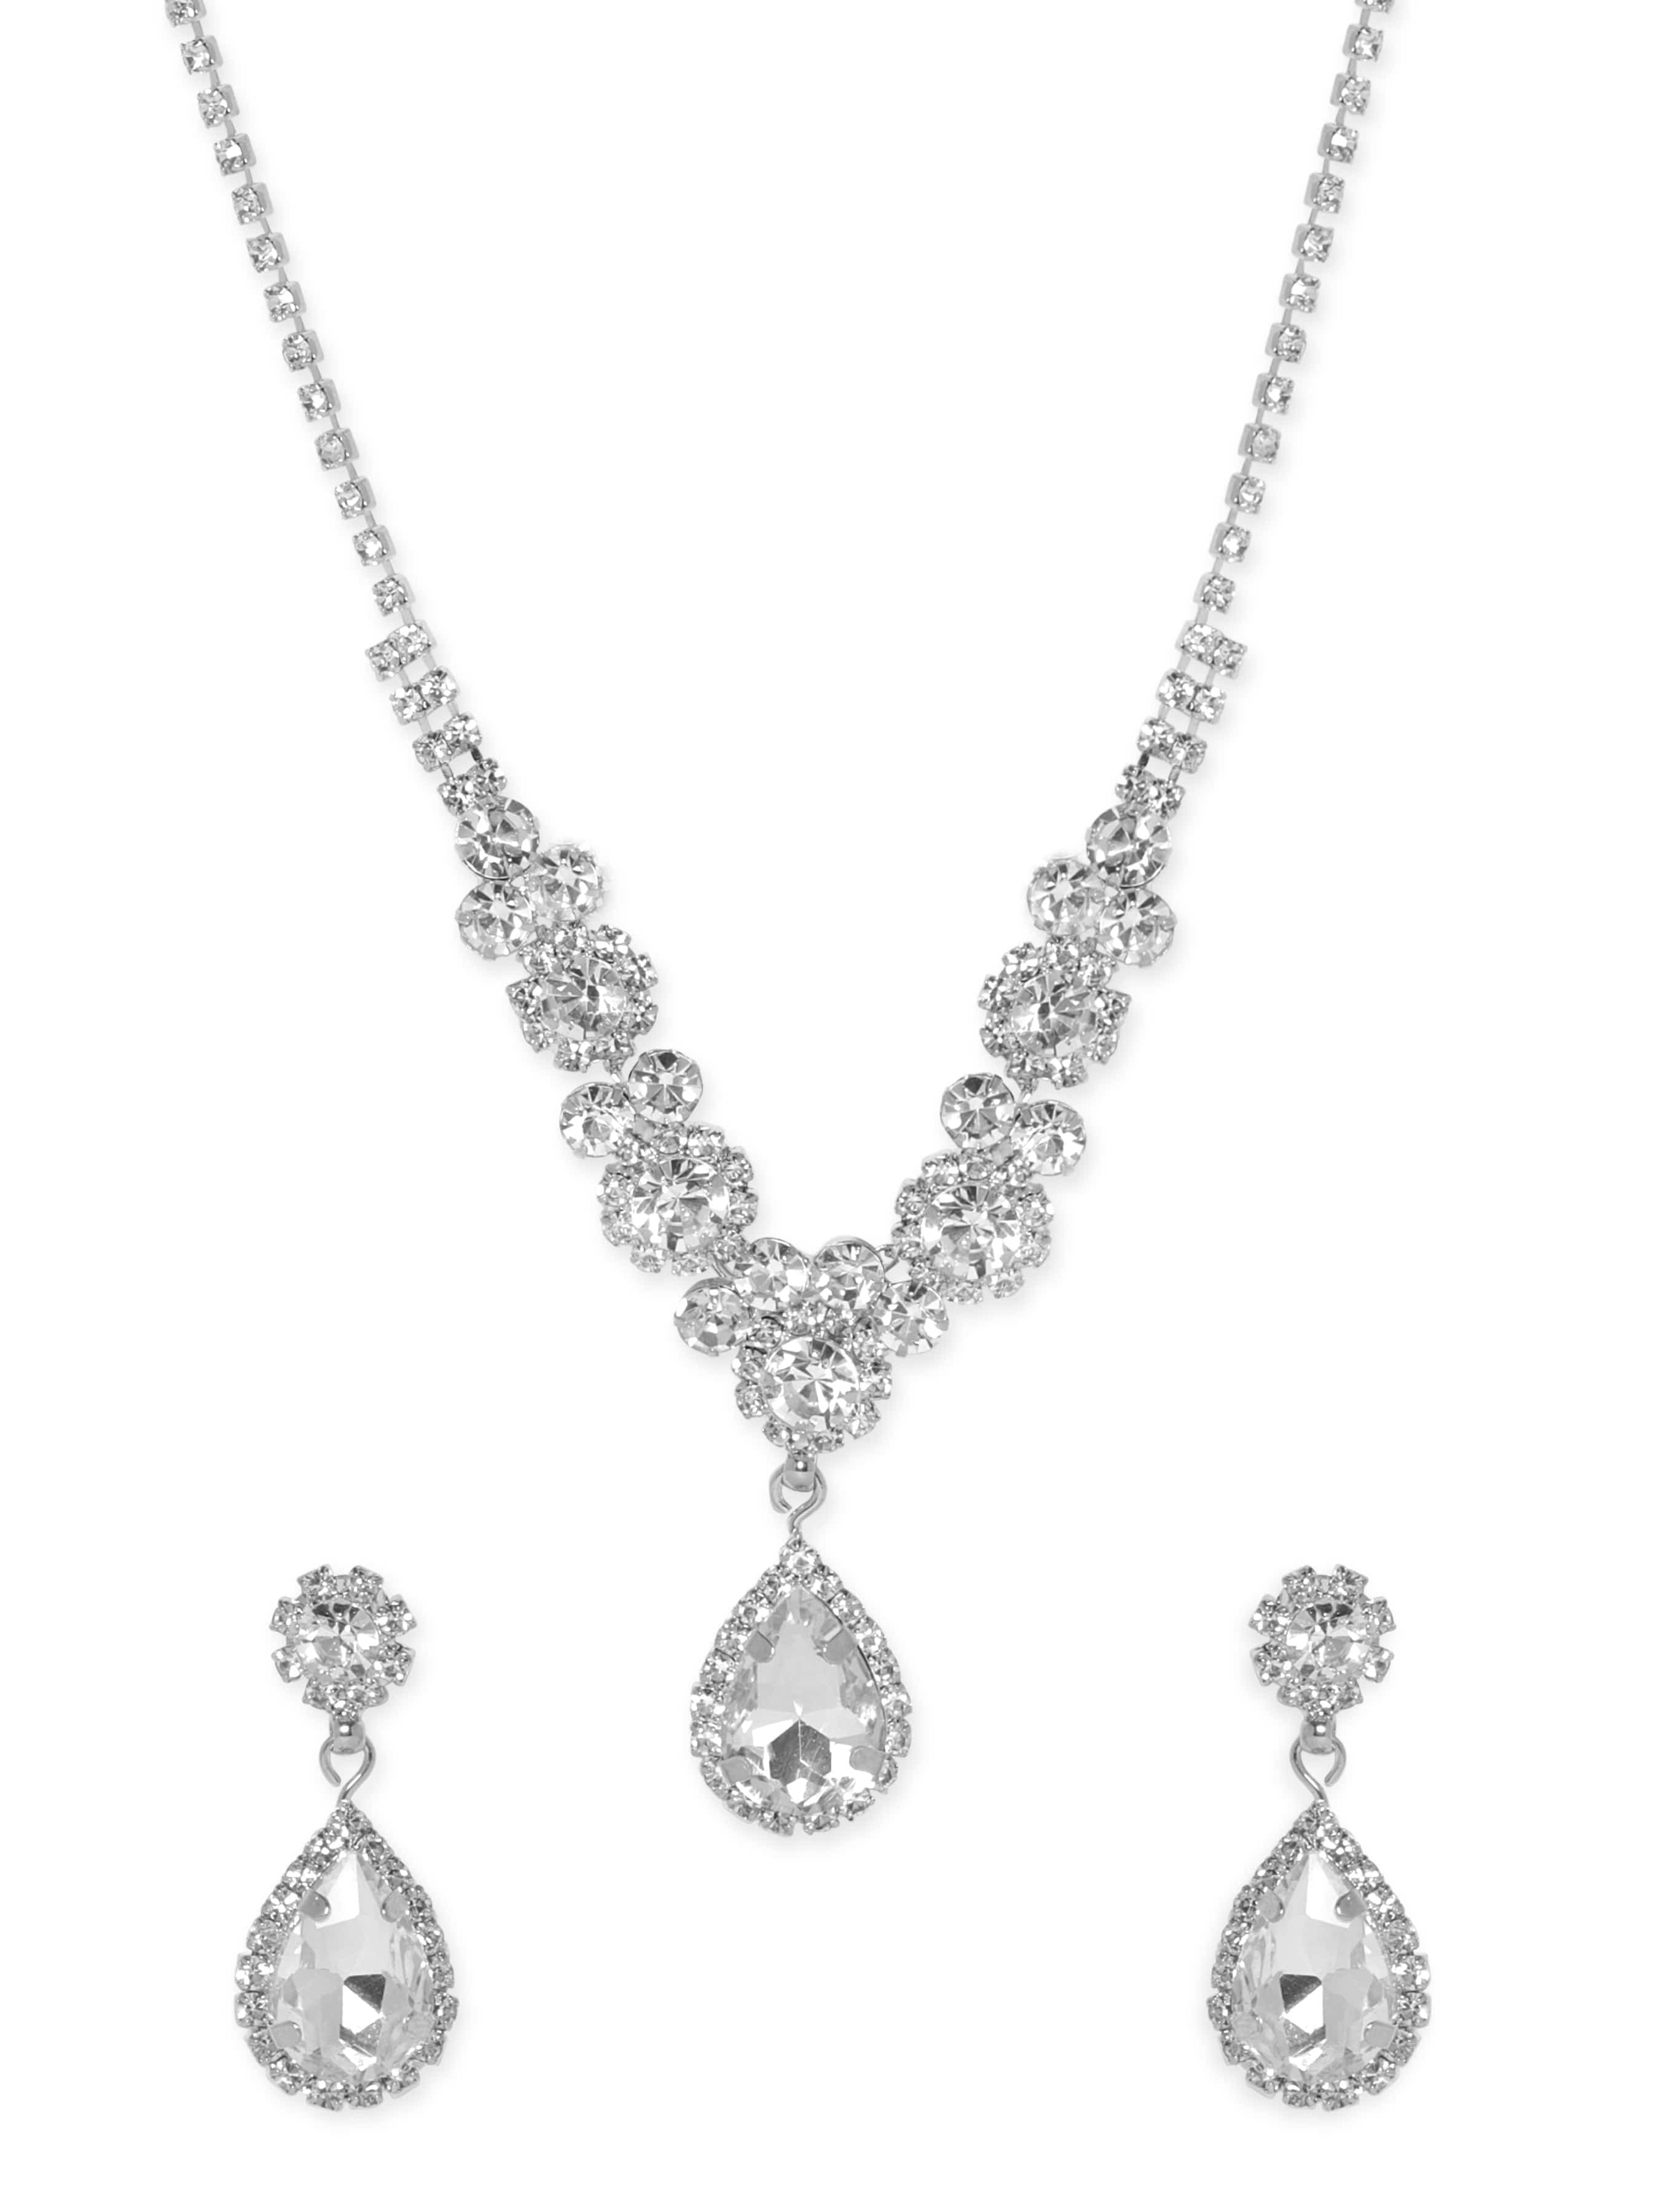 Buy Anbau Prom Bridal Crystal Diamante Tear Drop Necklace Earrings Jewelry  Set at Amazon.in